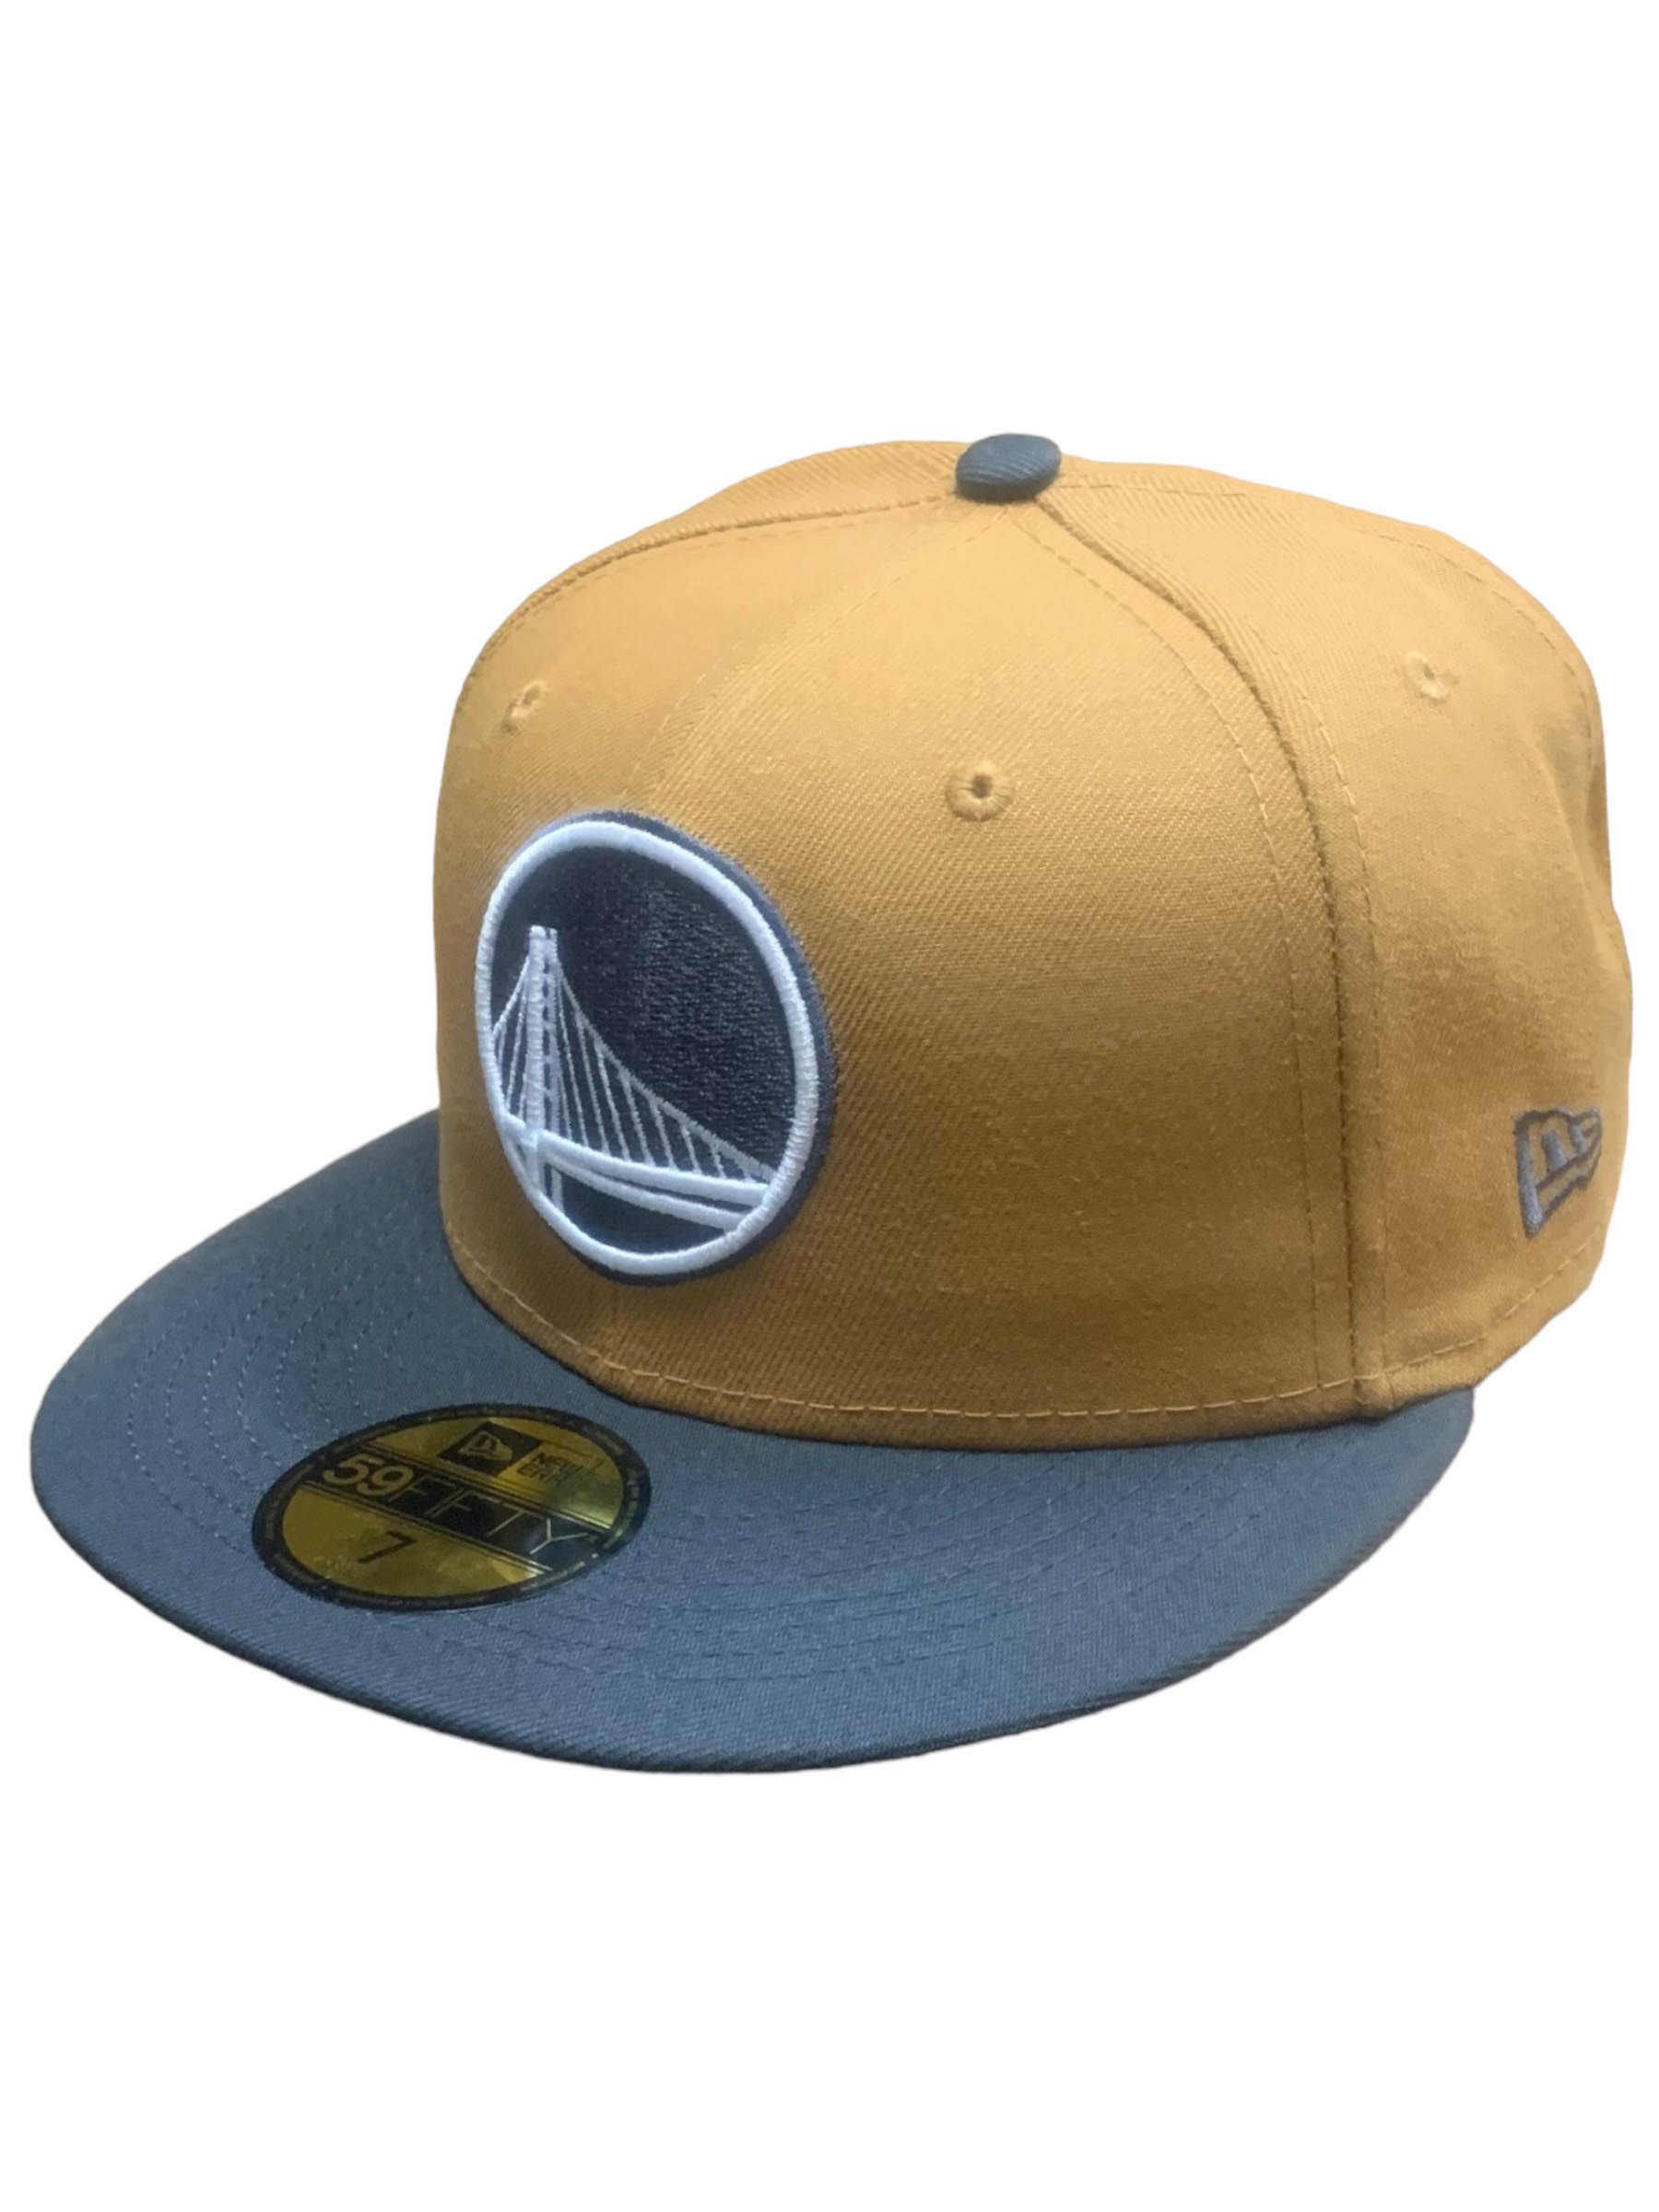 Oakland Athletics 2-Tone Color Pack 59FIFTY Fitted Hat - Light Blue/ Charcoal BLFSTC / 7 1/4